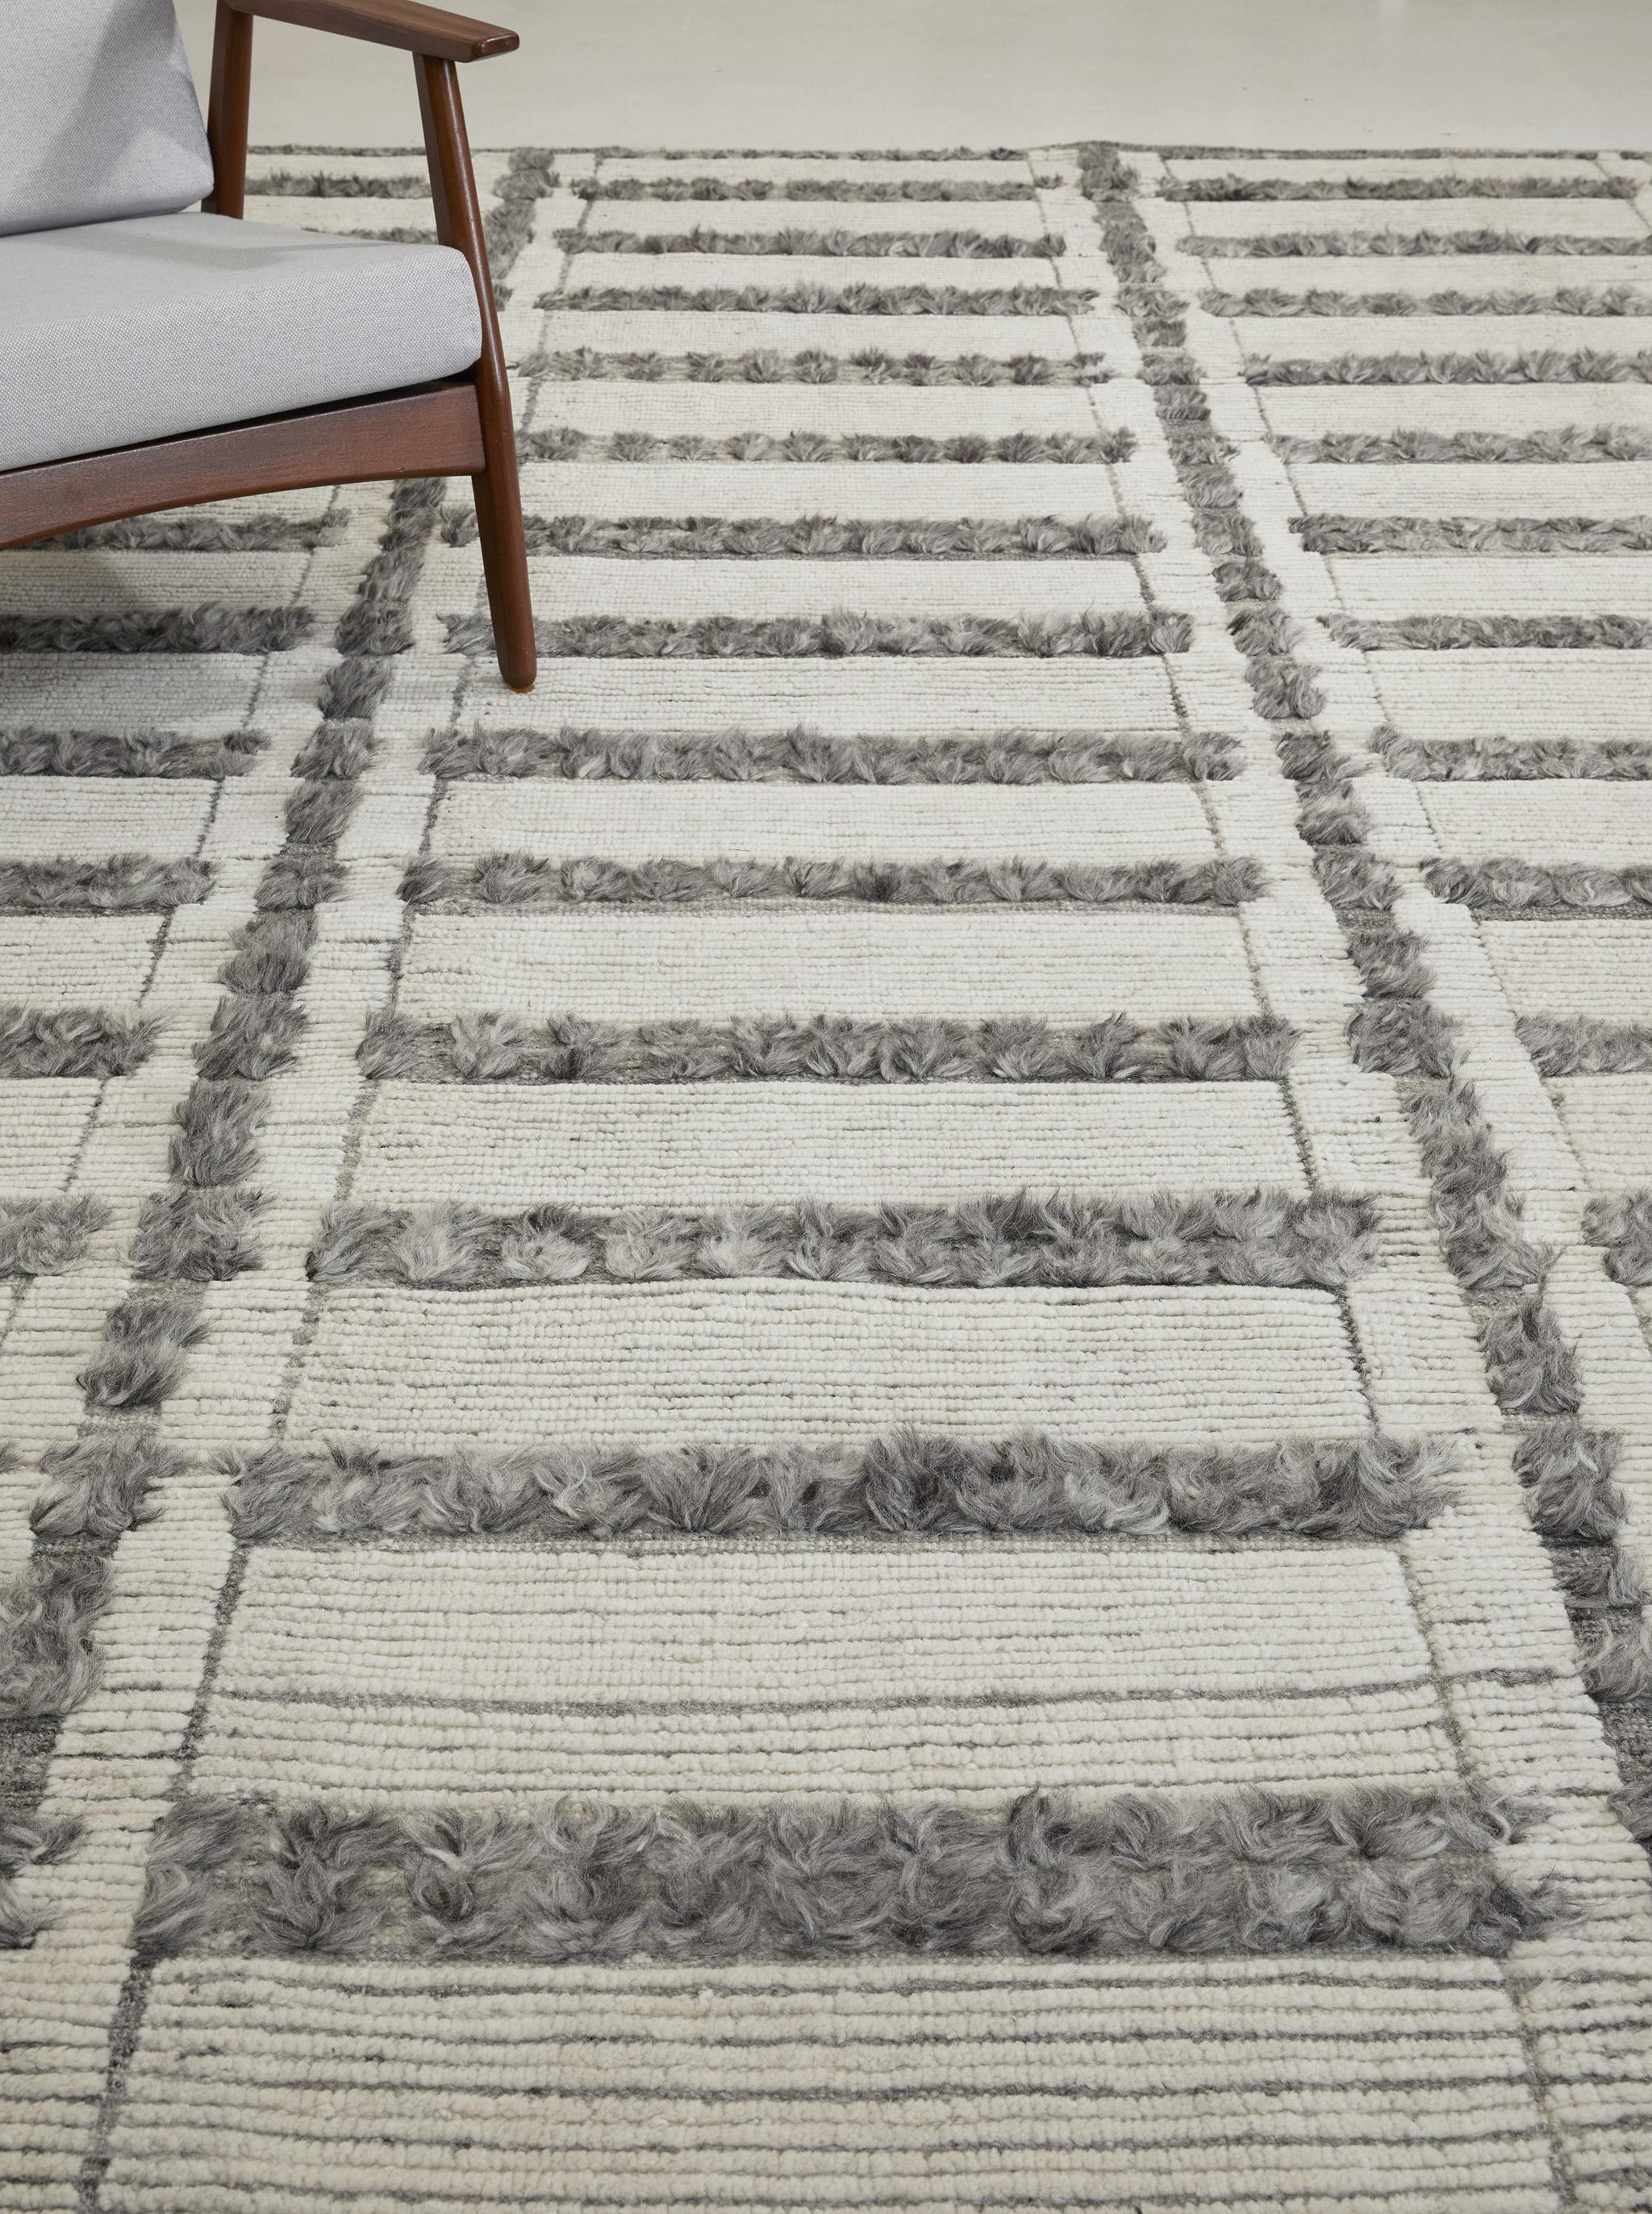 Ranks of long knots divide Colombard's trim pile and contrasting flatweave.

Here ivory pile contrasts with mottled grays.

The Estancia Collection by Mehraban is a group of casually sophisticated rugs in an array of upbeat colorways and design